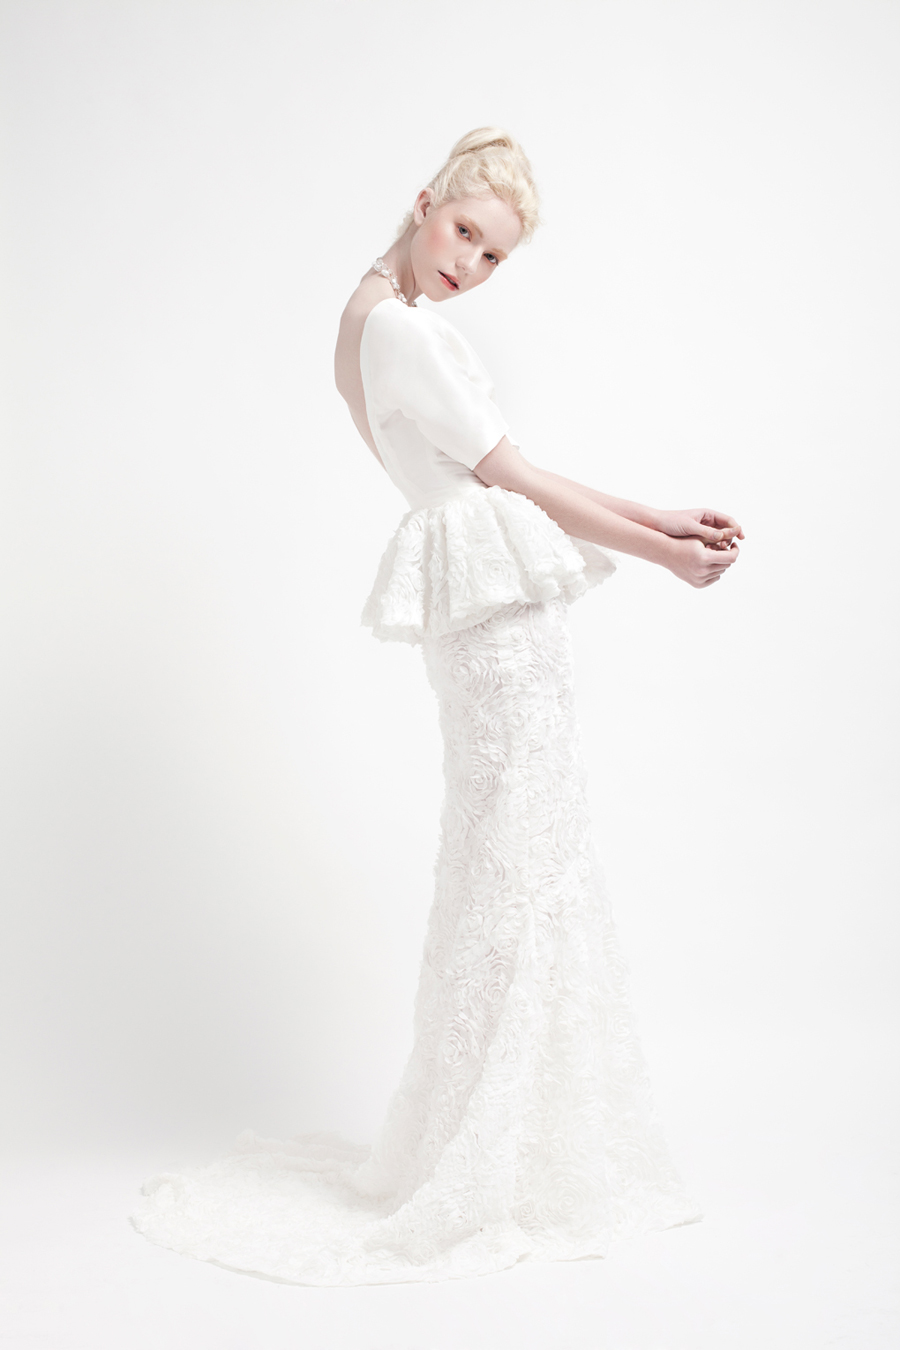 Garden Gown - Kelsey Genna Debut Bridal Collection